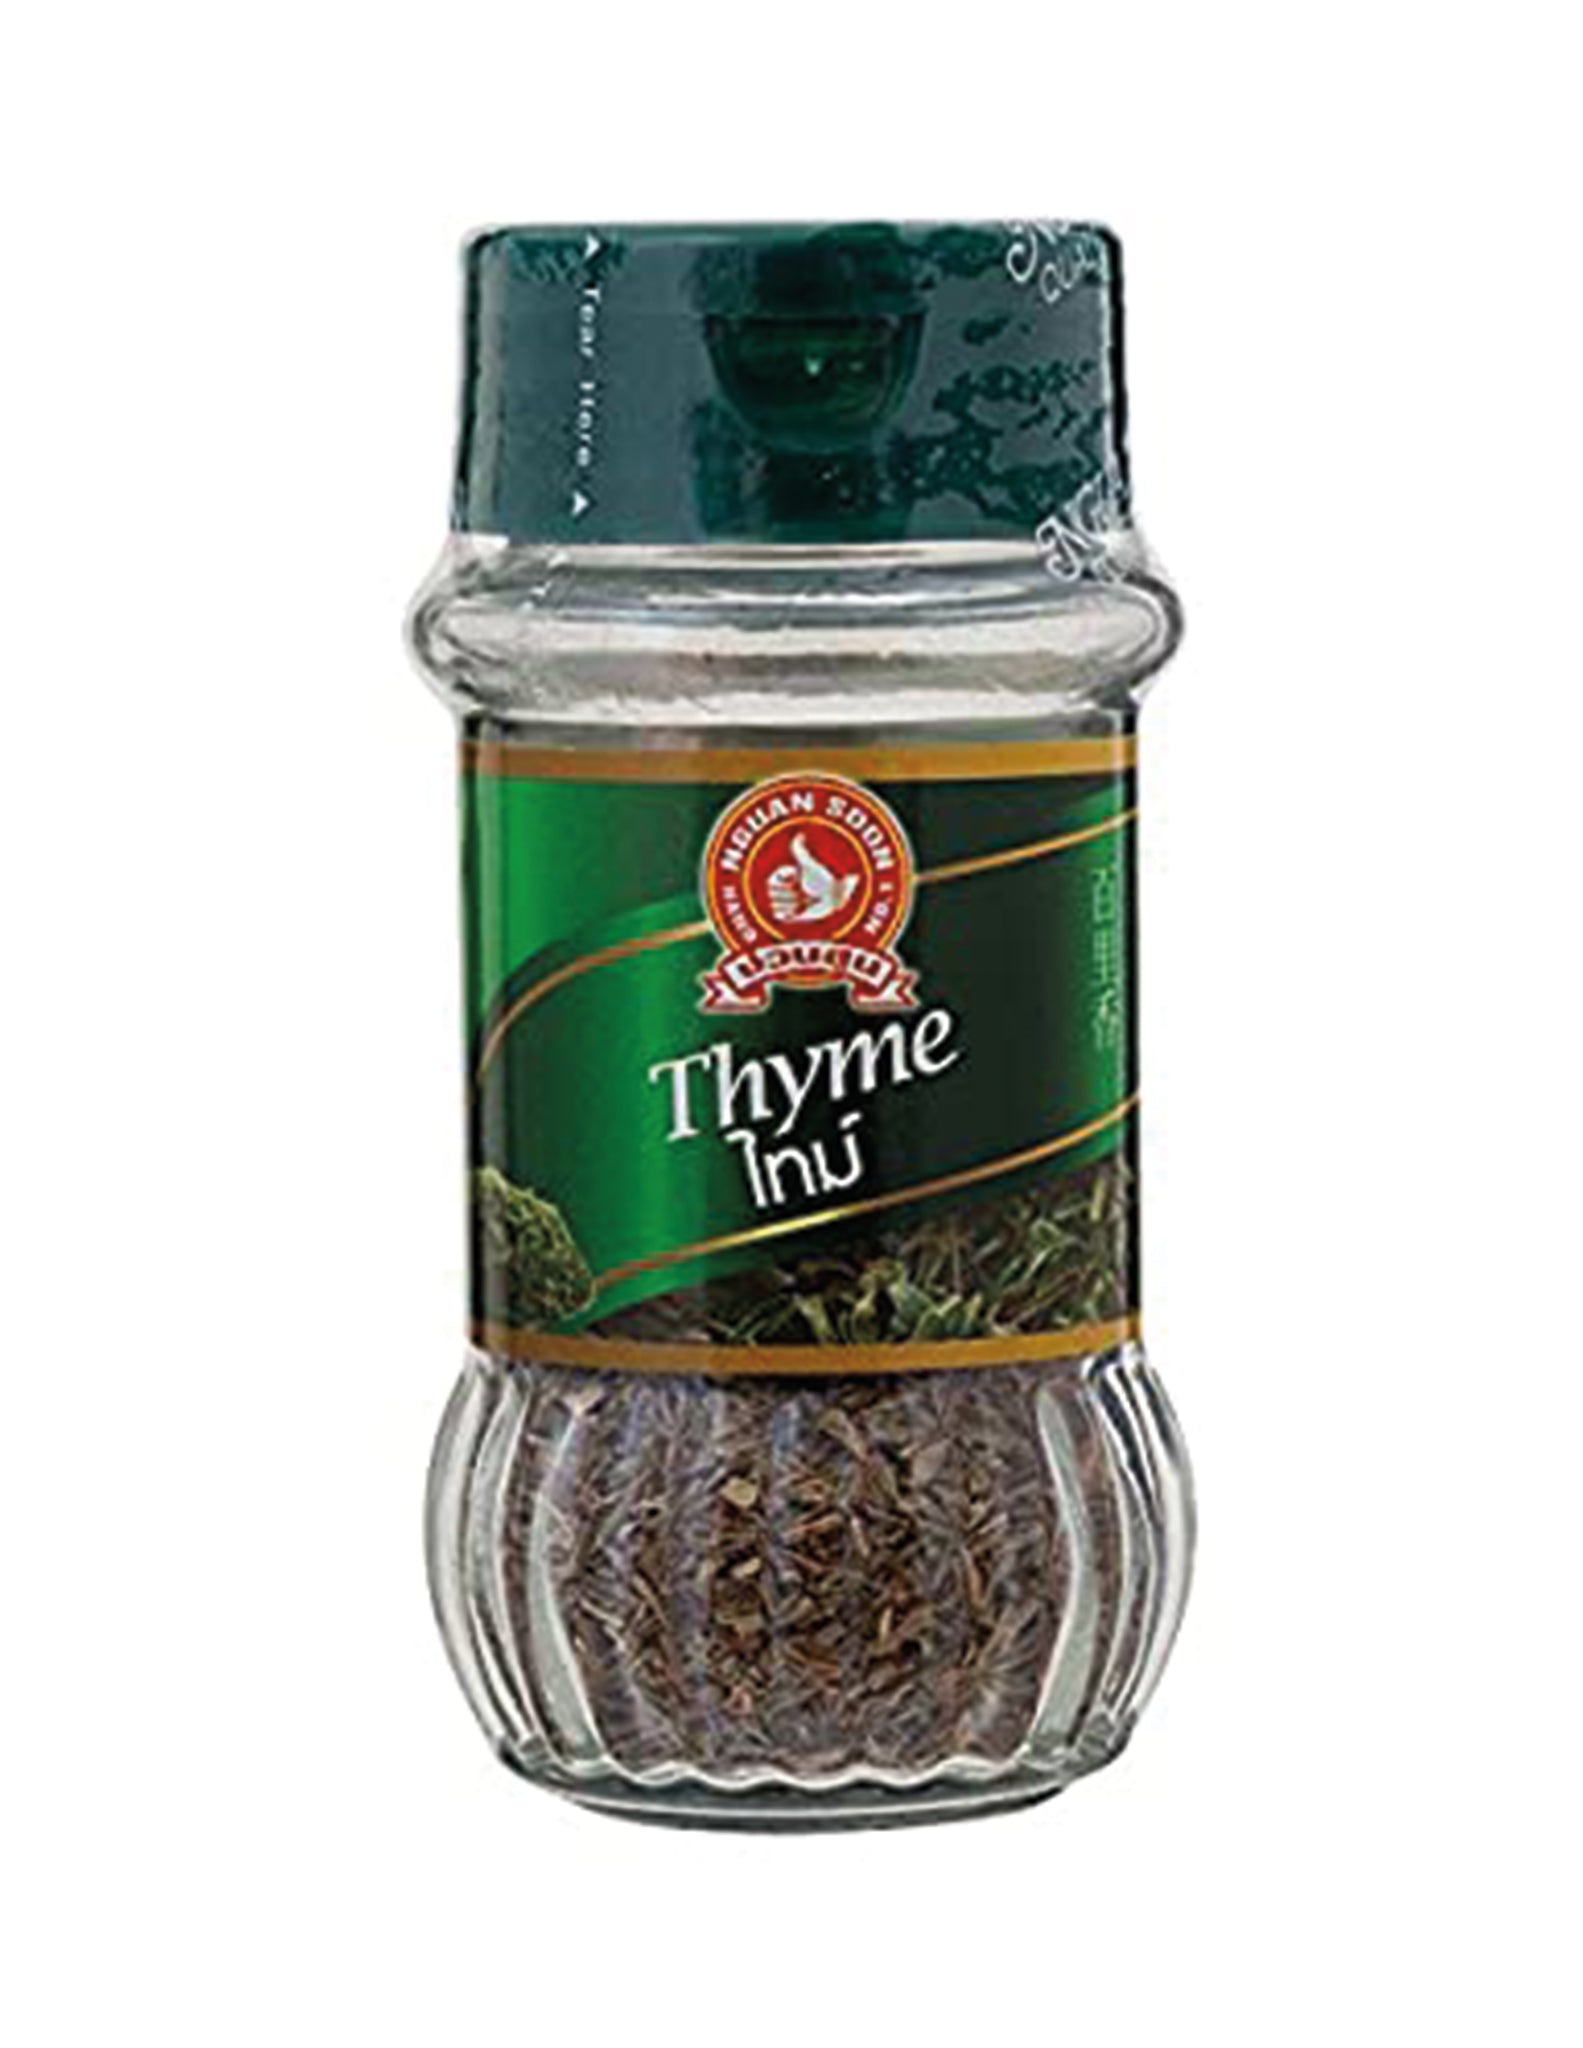 tha>Nguan Soon Thyme herbs and spices 21 grams